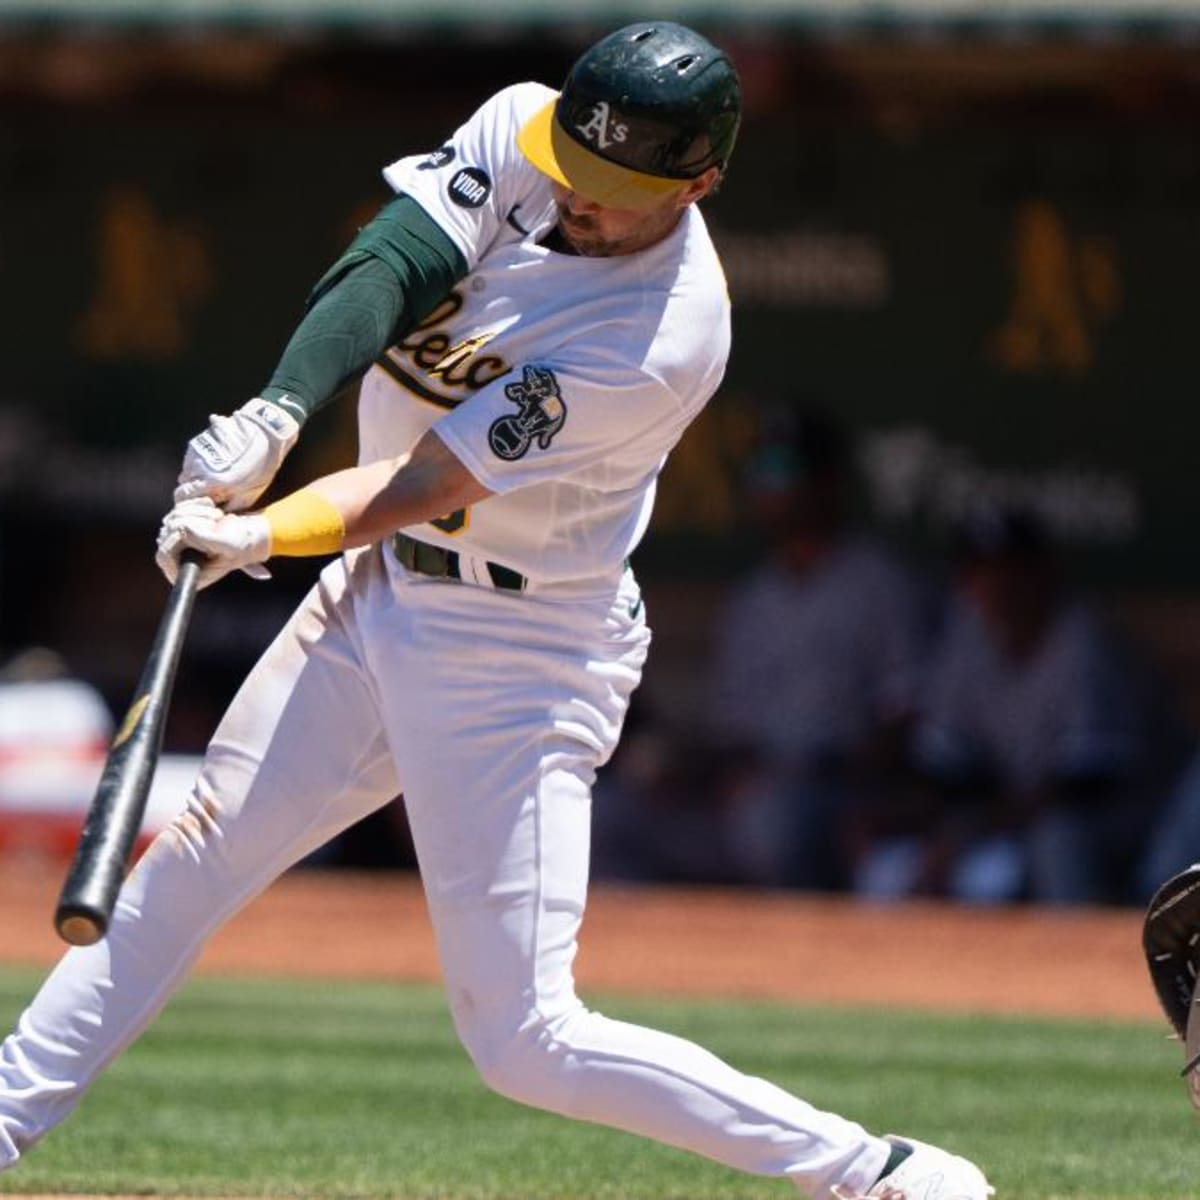 Ex-Yankees Utility Man DFA'd By Athletics; Could Third Stint In New York Be  In Works? - Sports Illustrated NY Yankees News, Analysis and More